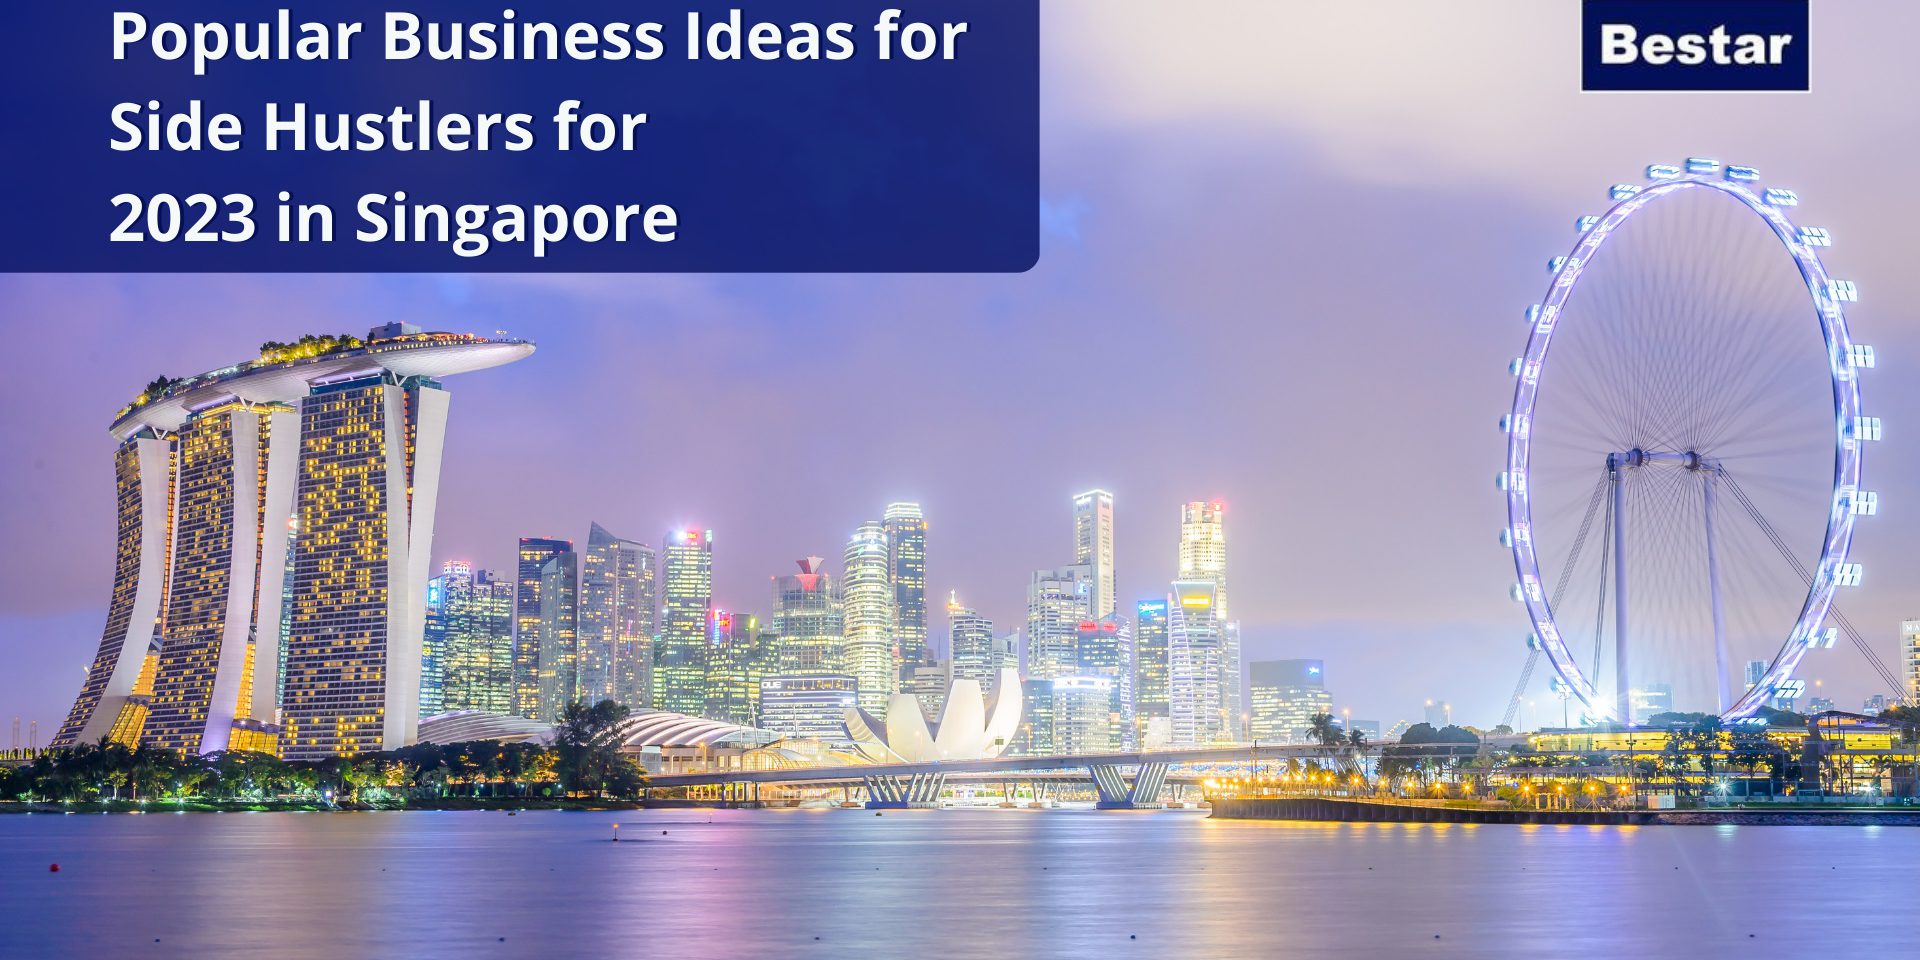 Popular Business Ideas for Side Hustlers for 2023 in Singapore